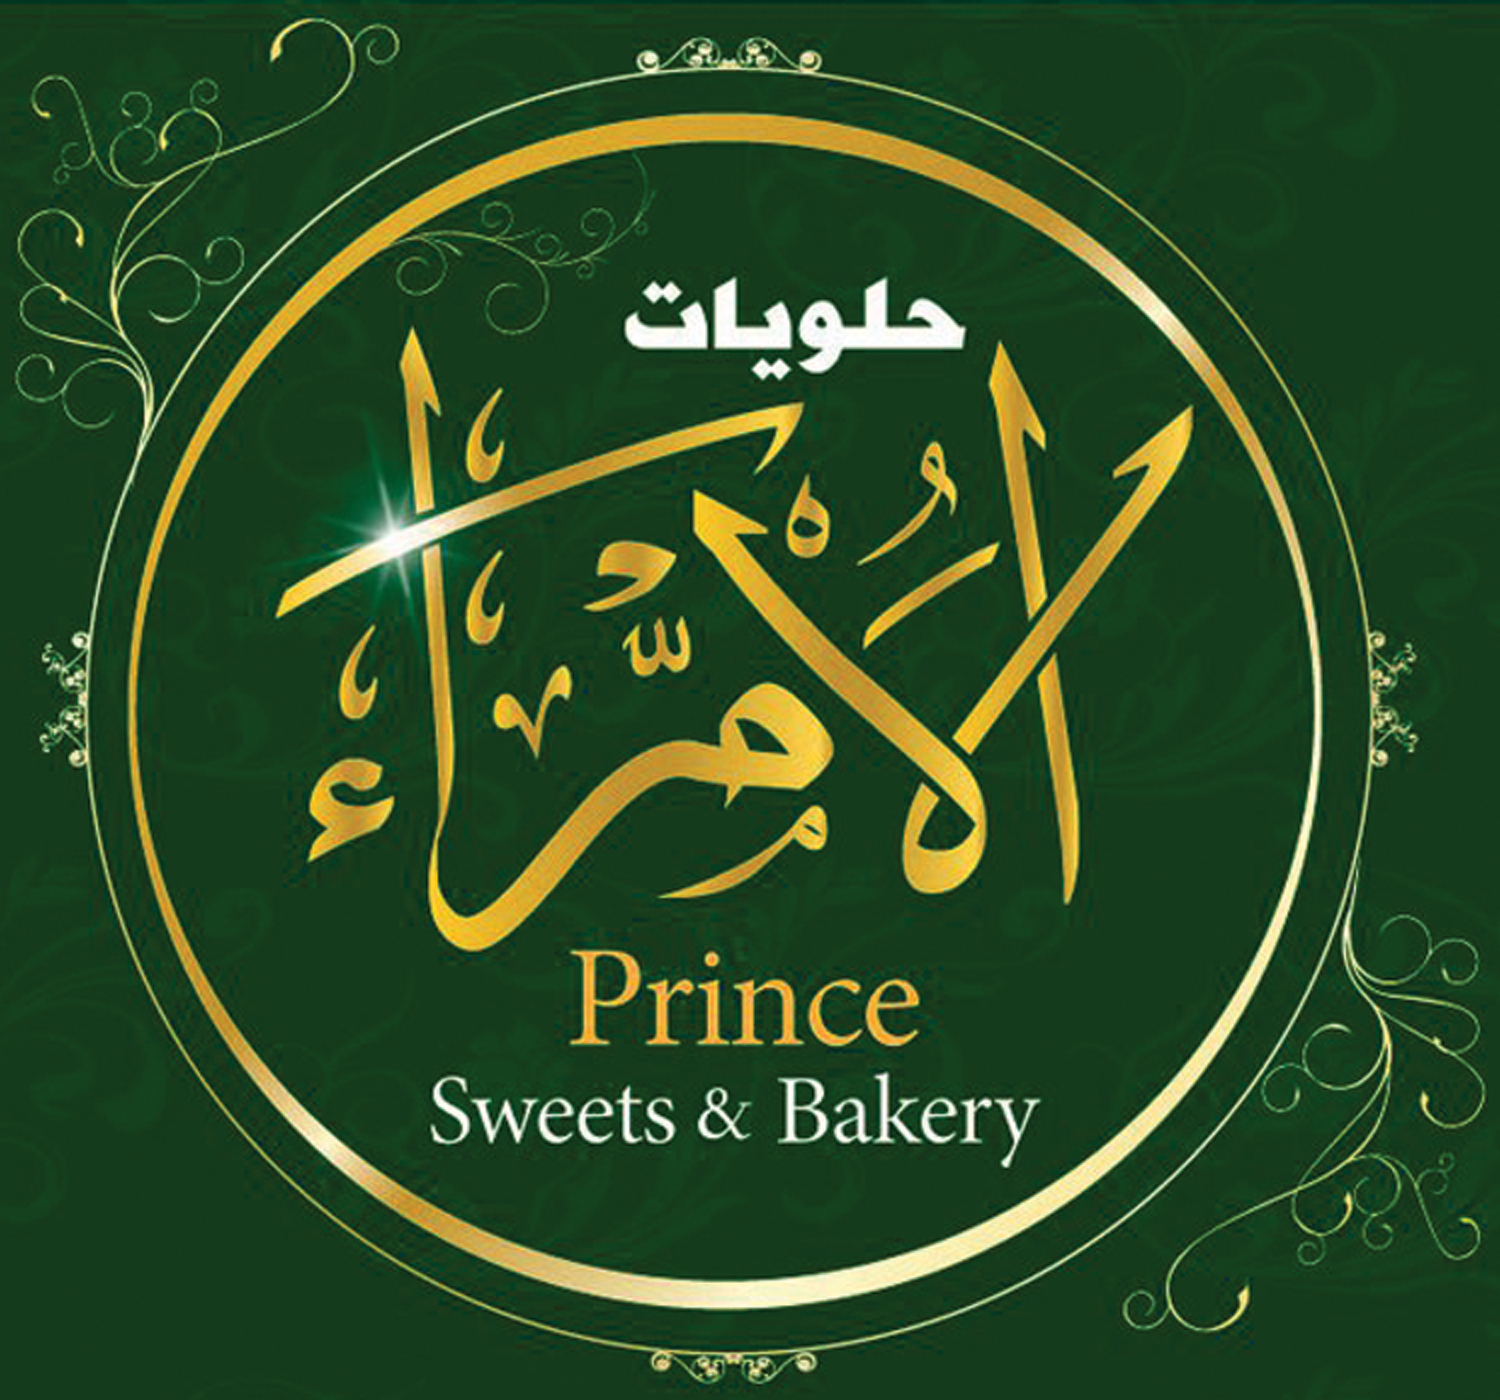 Prince Sweets and Bakery